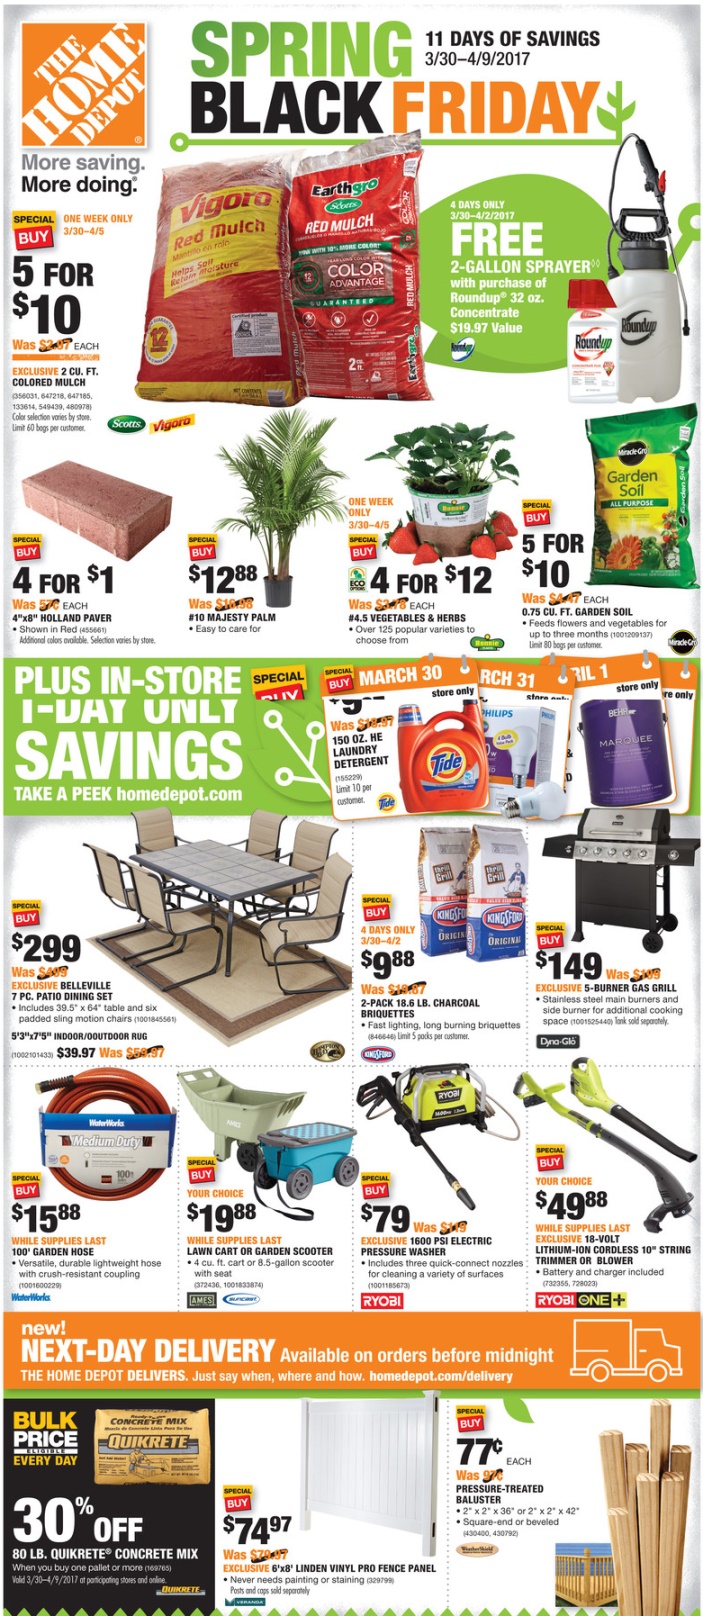 Home Depot Spring Black Friday 2018 Ads, Deals and Sales